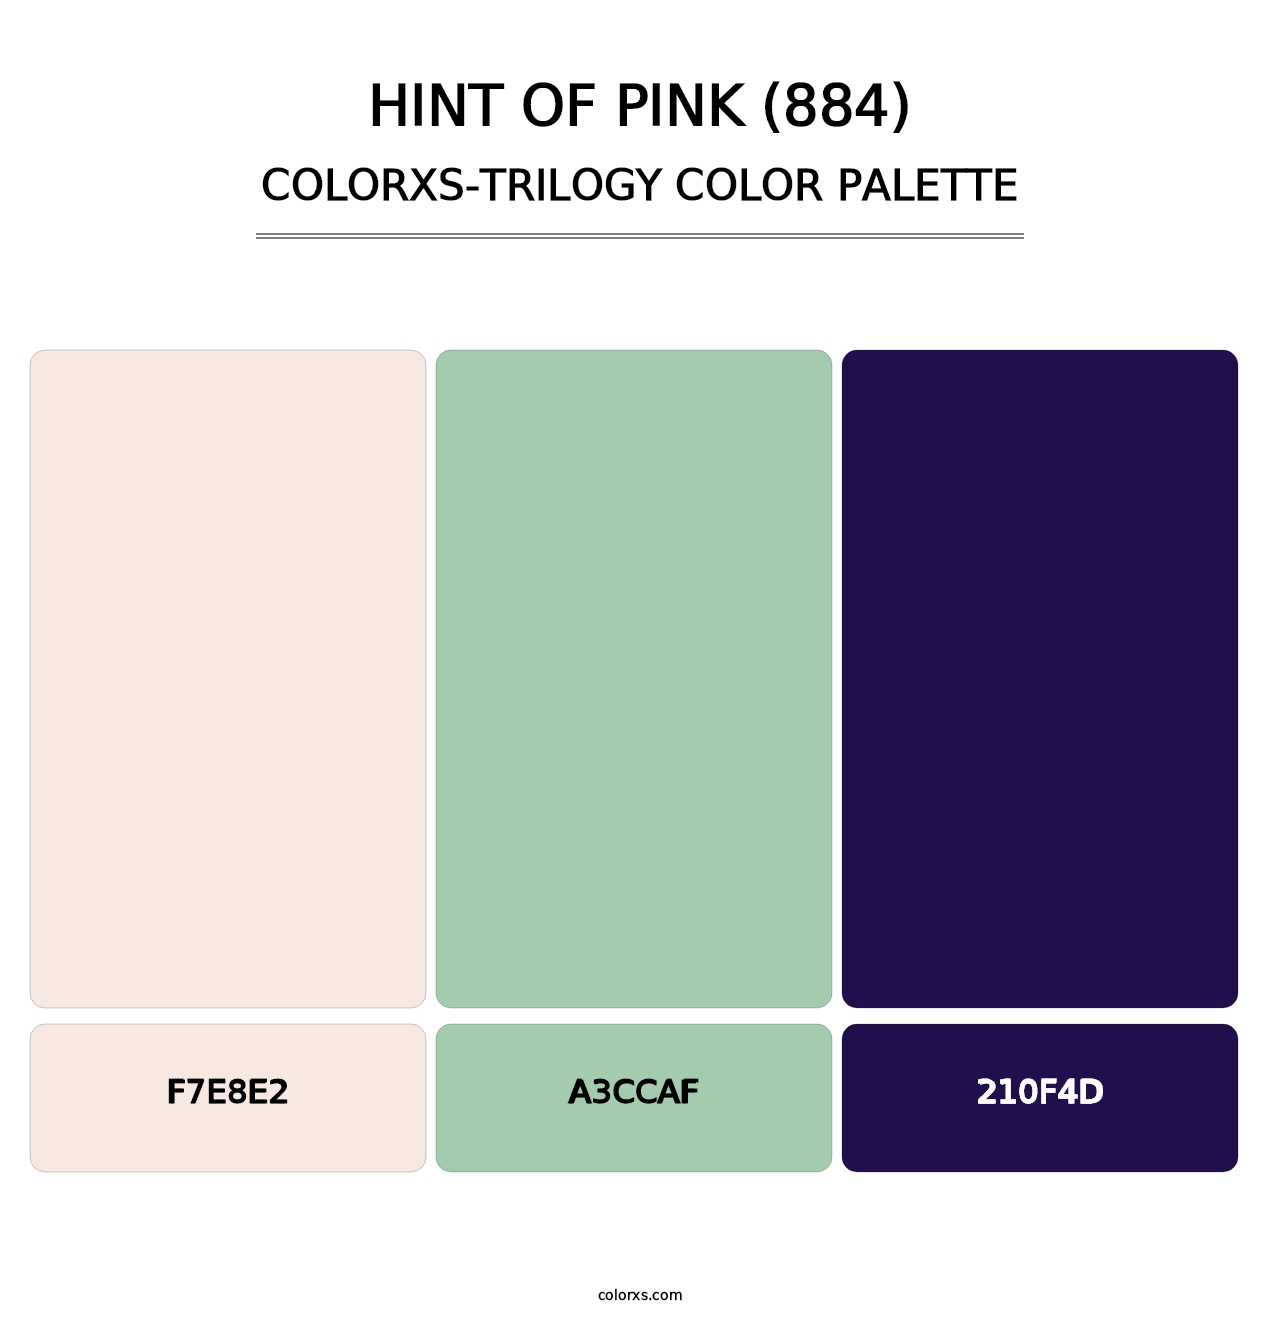 Hint of Pink (884) - Colorxs Trilogy Palette